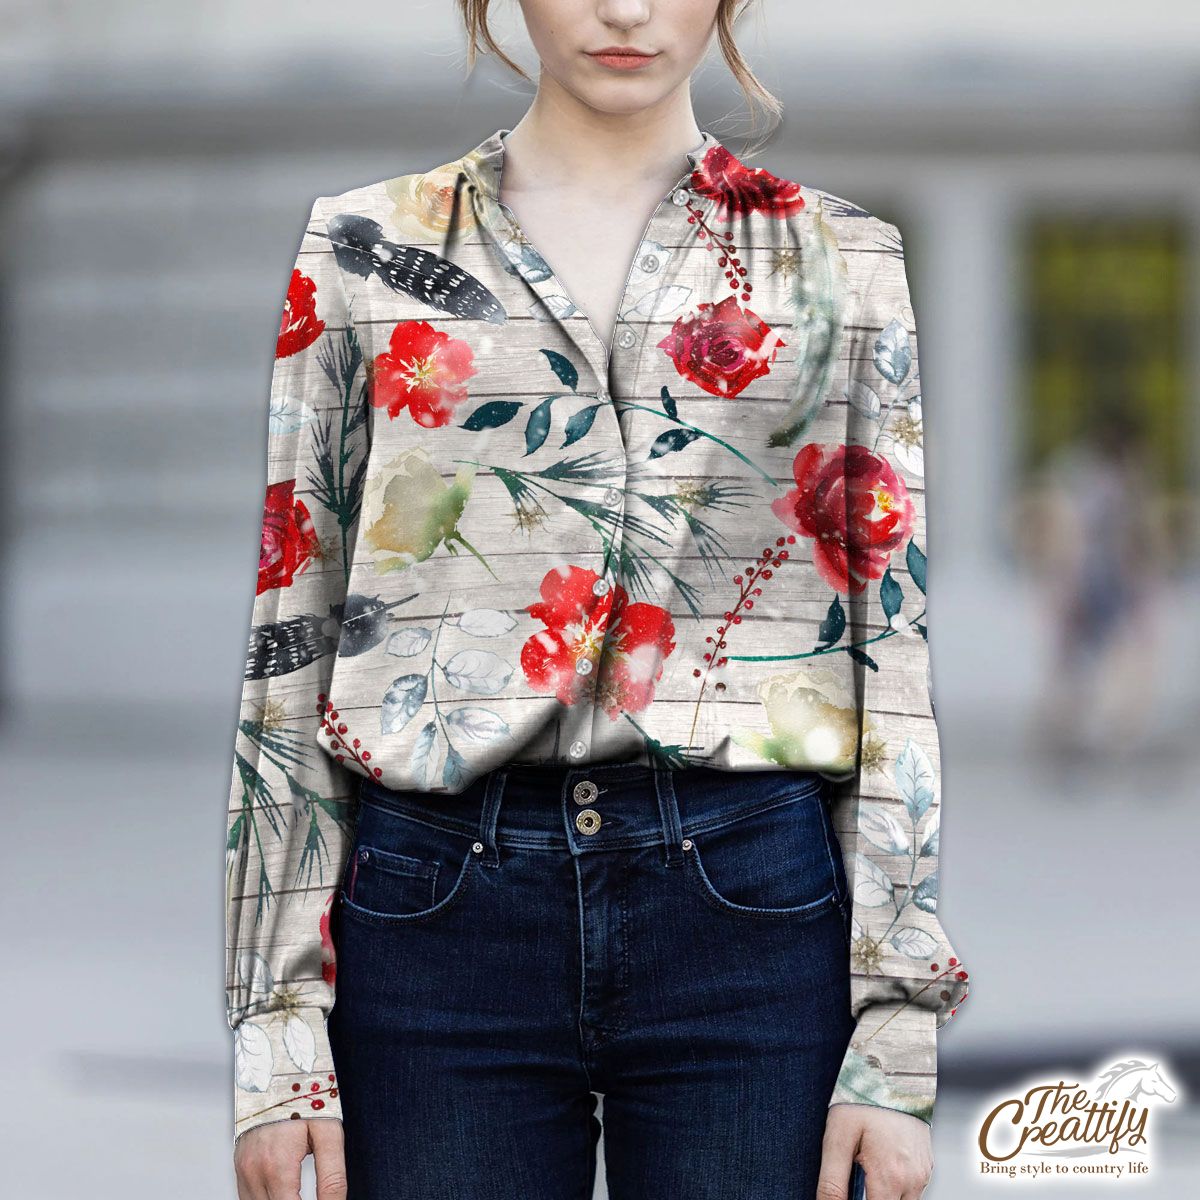 Florals With Red Berries Pattern V-Neckline Blouses